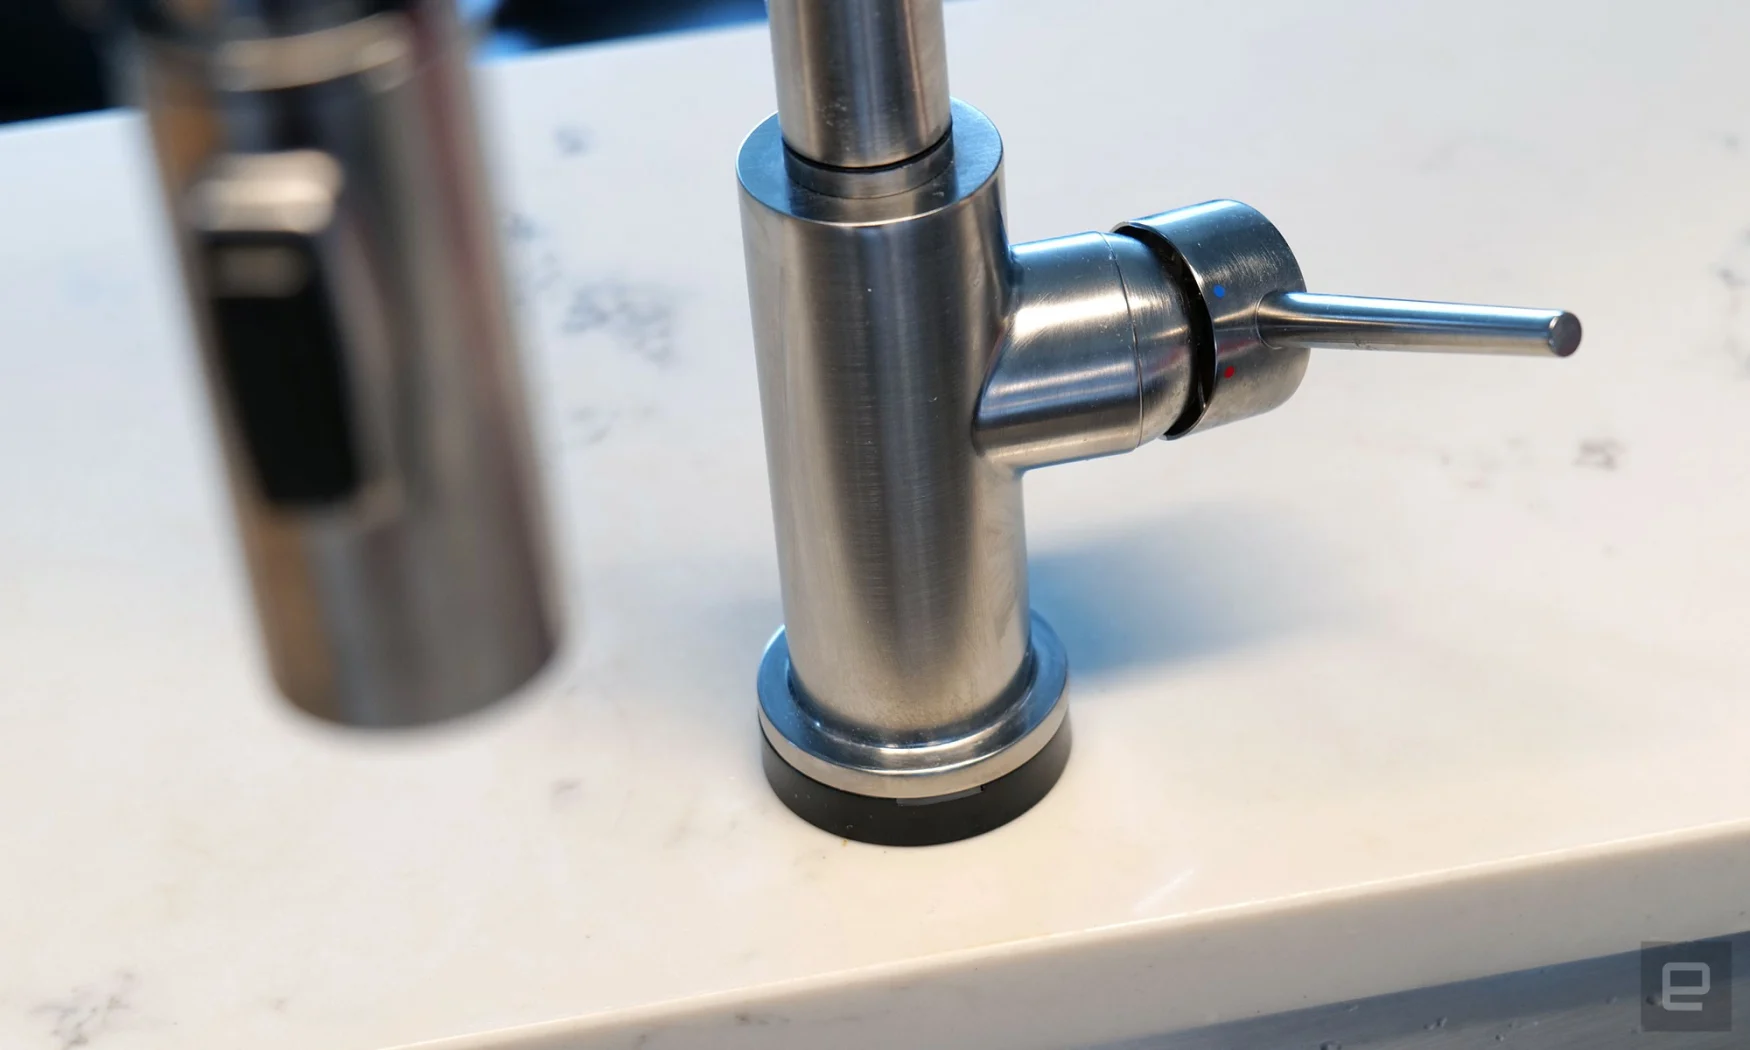 Unlike a traditional faucet, it feels like the best way to use the Touch20 tech is leaving the handle open all the time and rely entirely on touch inputs to turn the water on and off. 